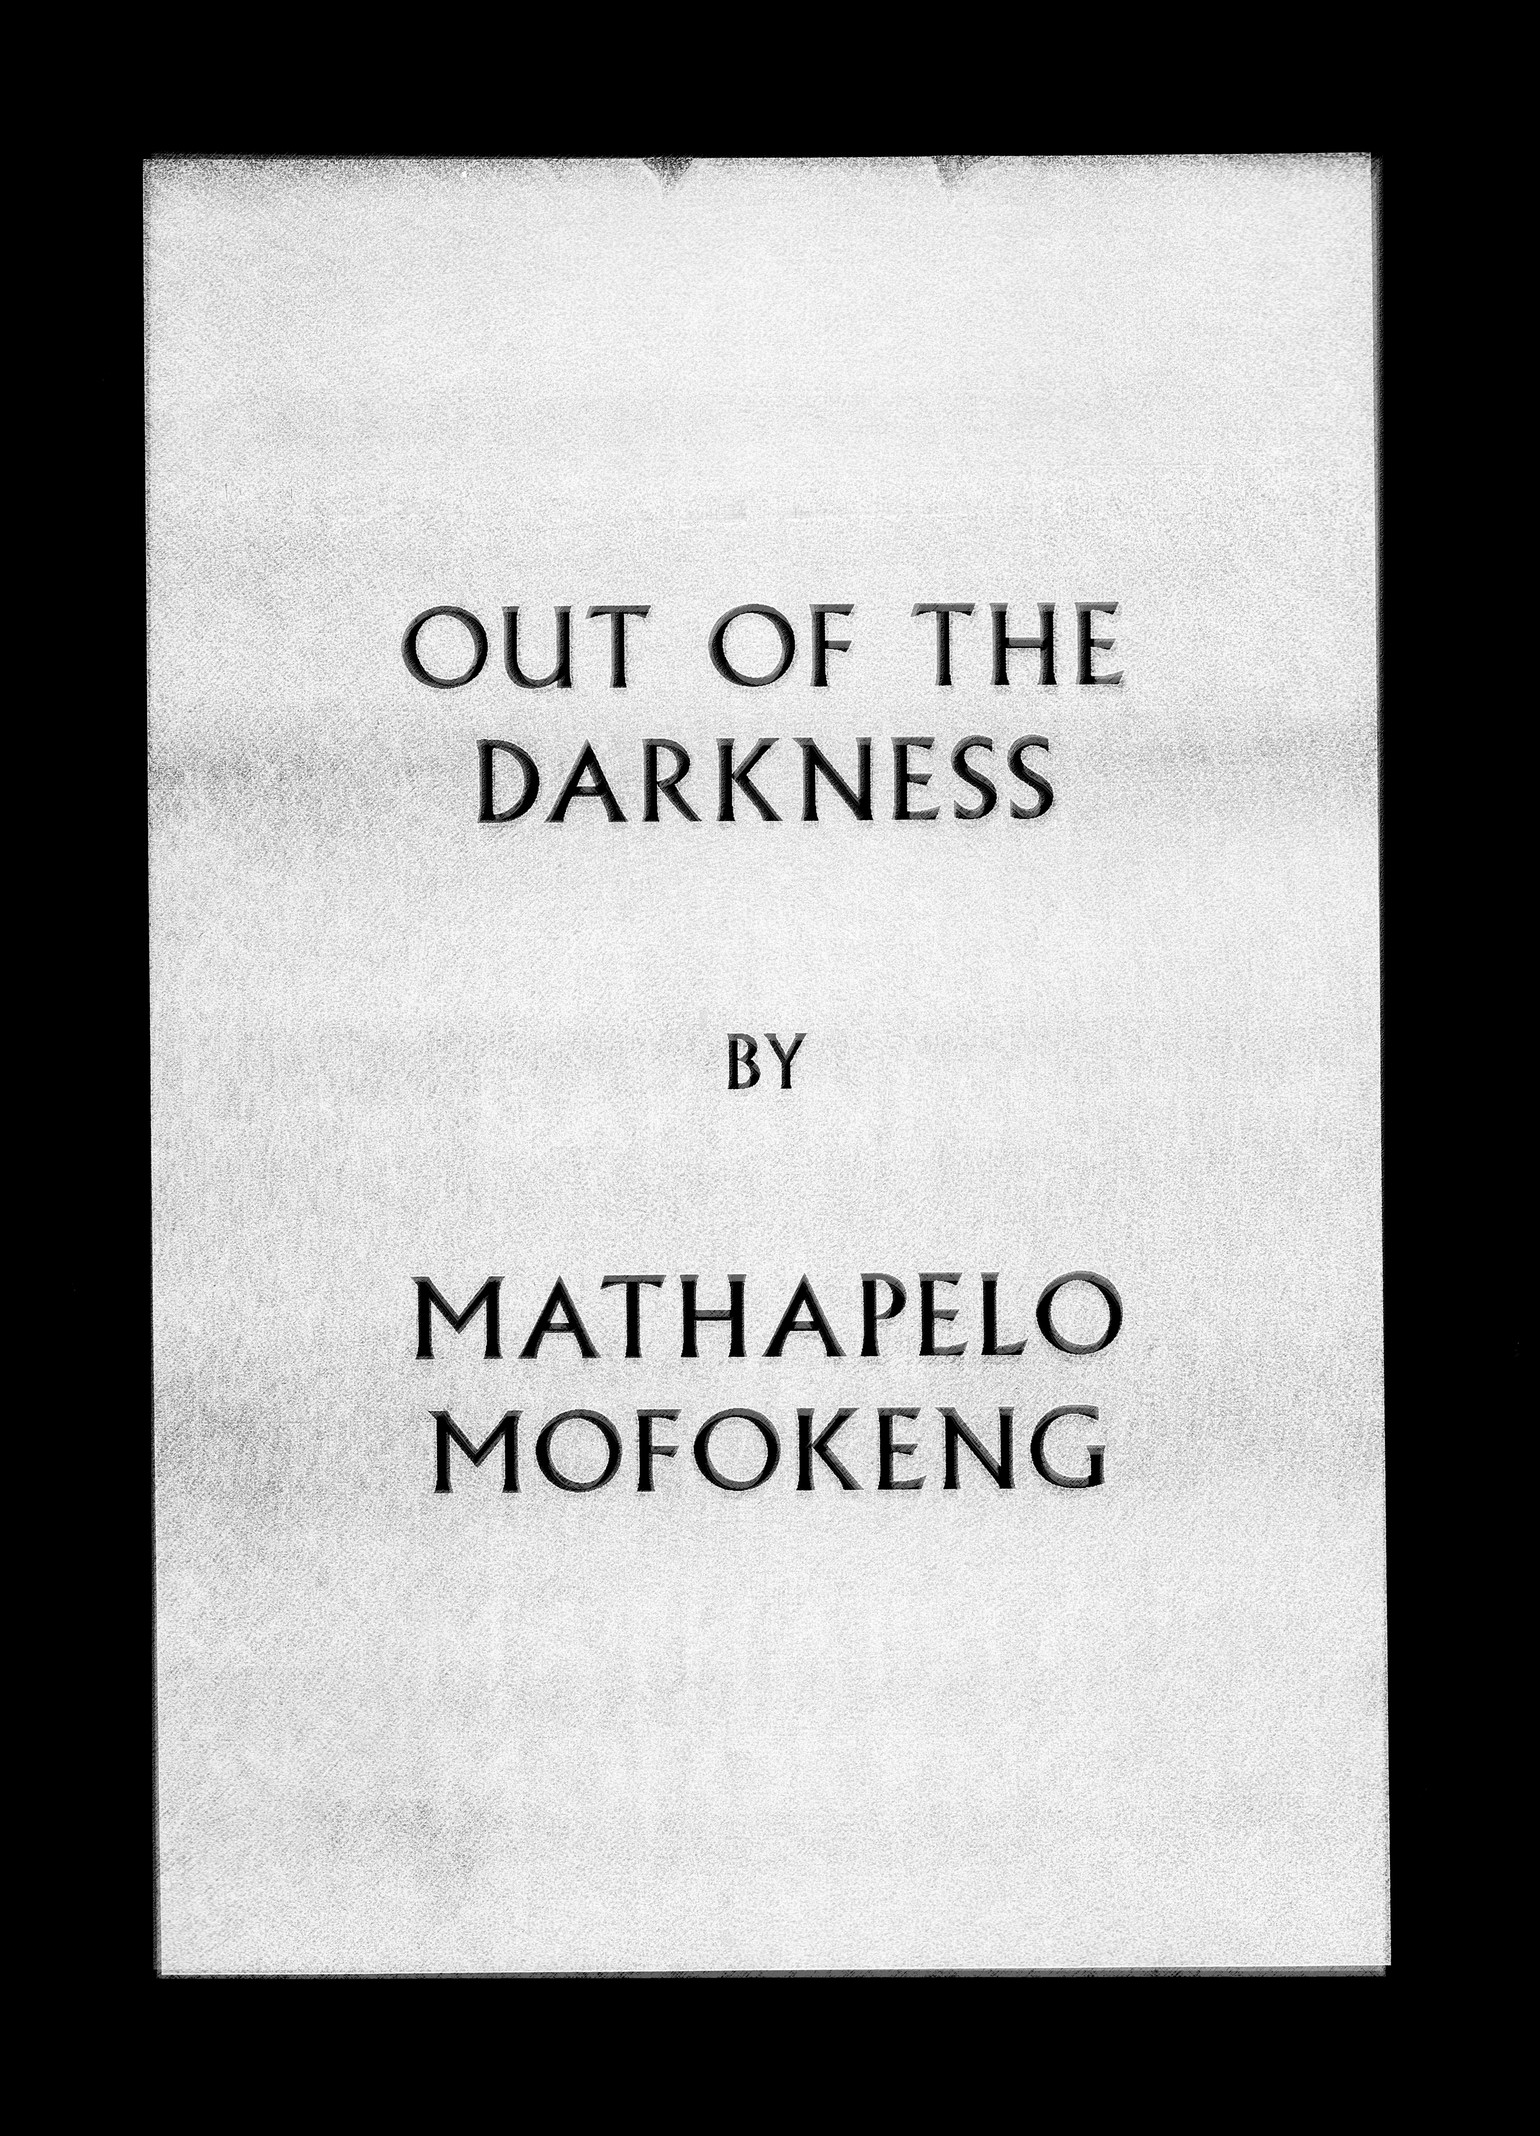 Out of the Darkness by Mathapelo Mofokeng Fiction Gagosian Quarterly